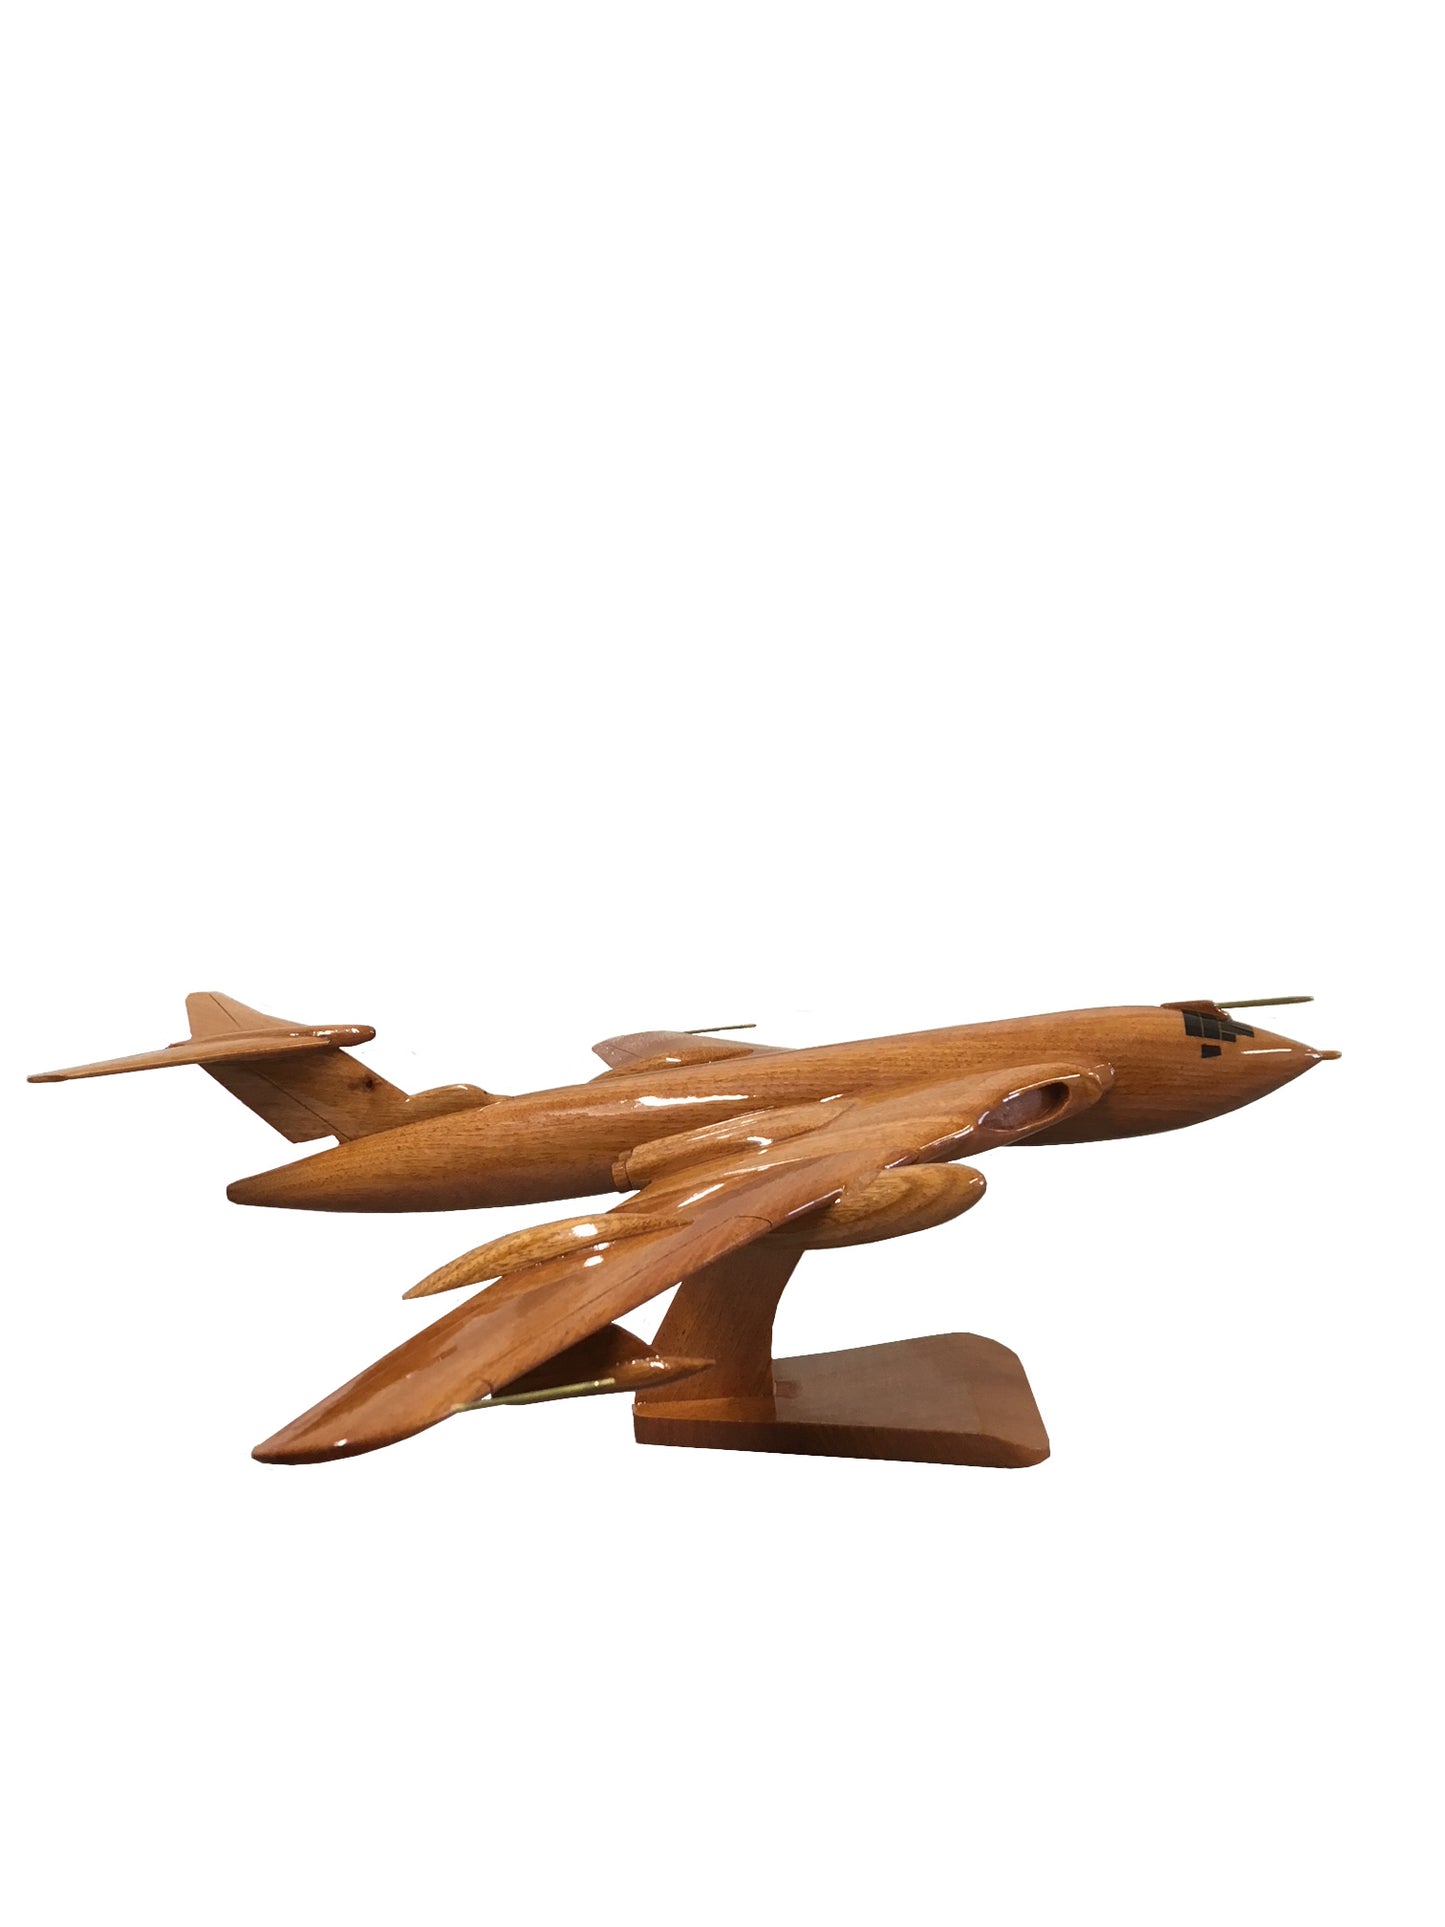 Handley Page Victor RAF Strategic Nuclear Bomber Aerial Refueling Aircraft Wooden Desktop Model